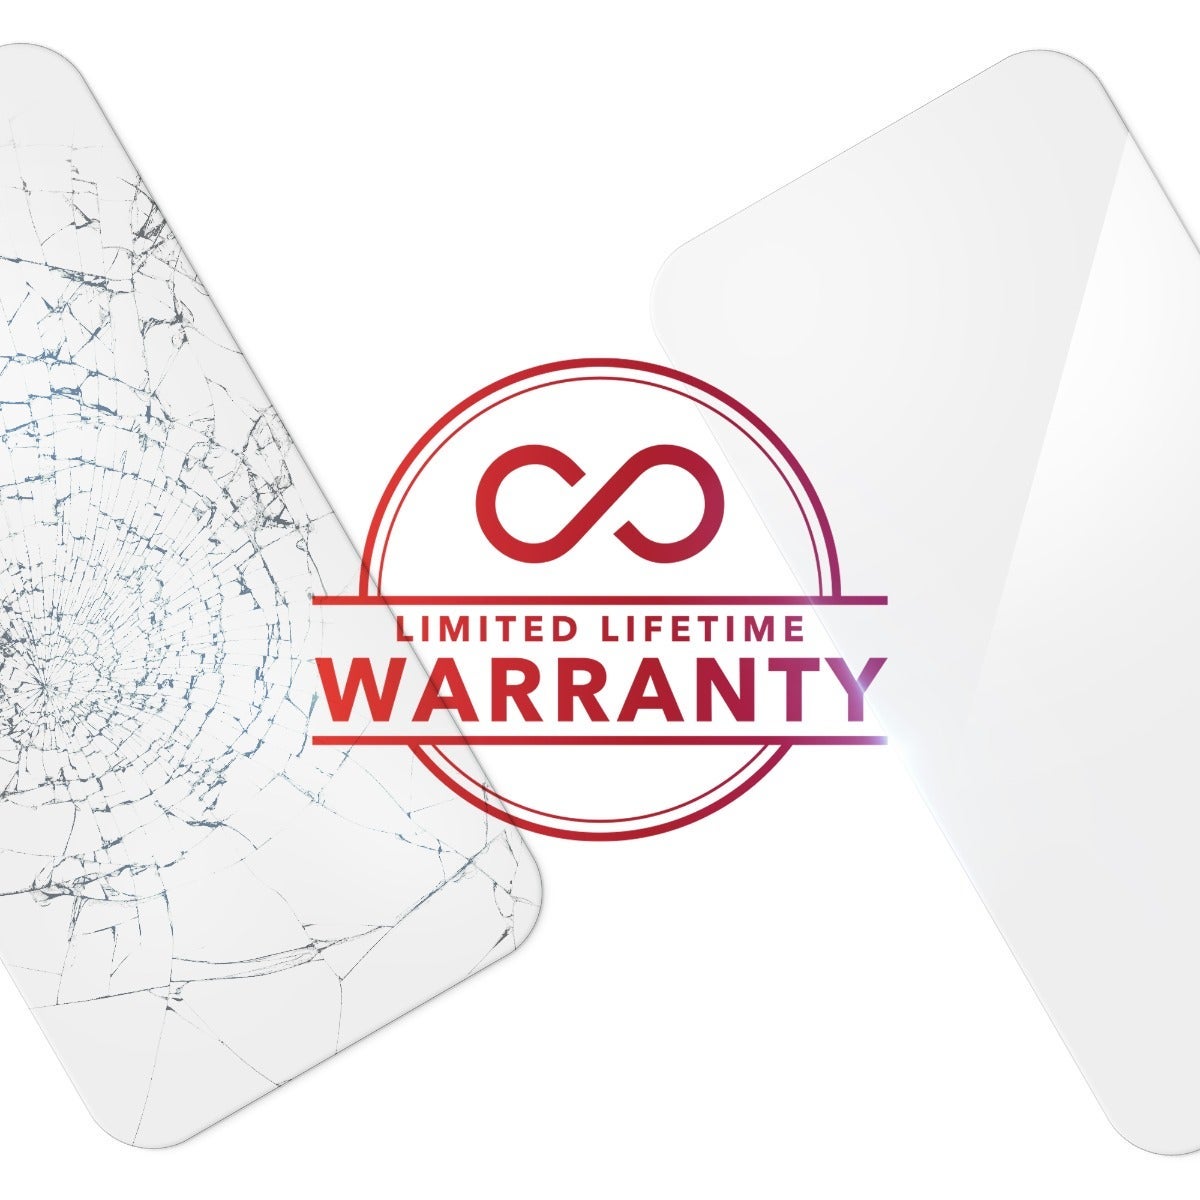 Limited Lifetime Warranty
|| All InvisibleShield screen protectors come with a Limited Lifetime Warranty